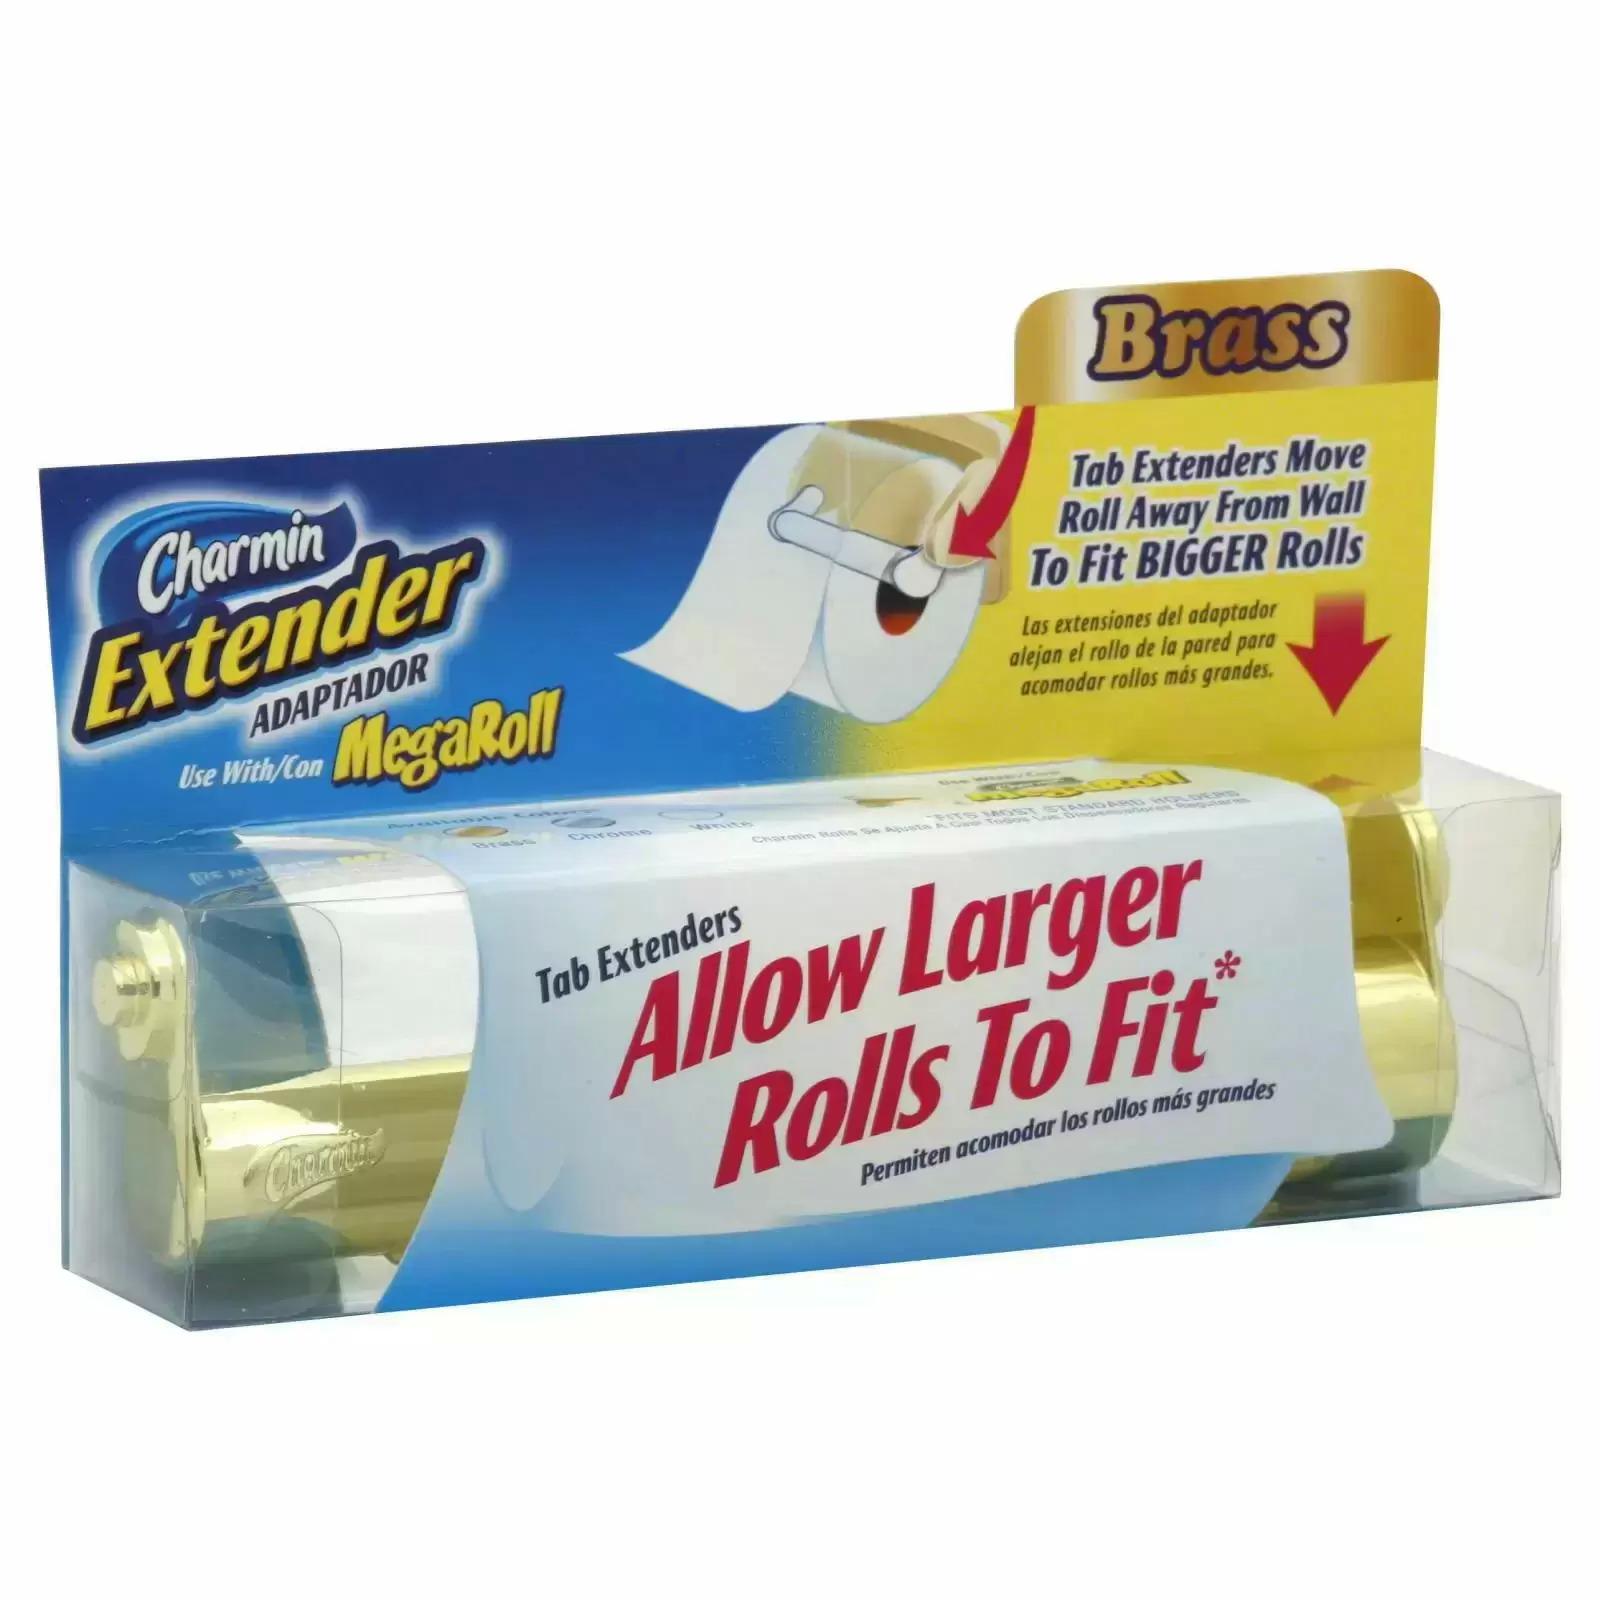 Charmin Roll Extender for Free